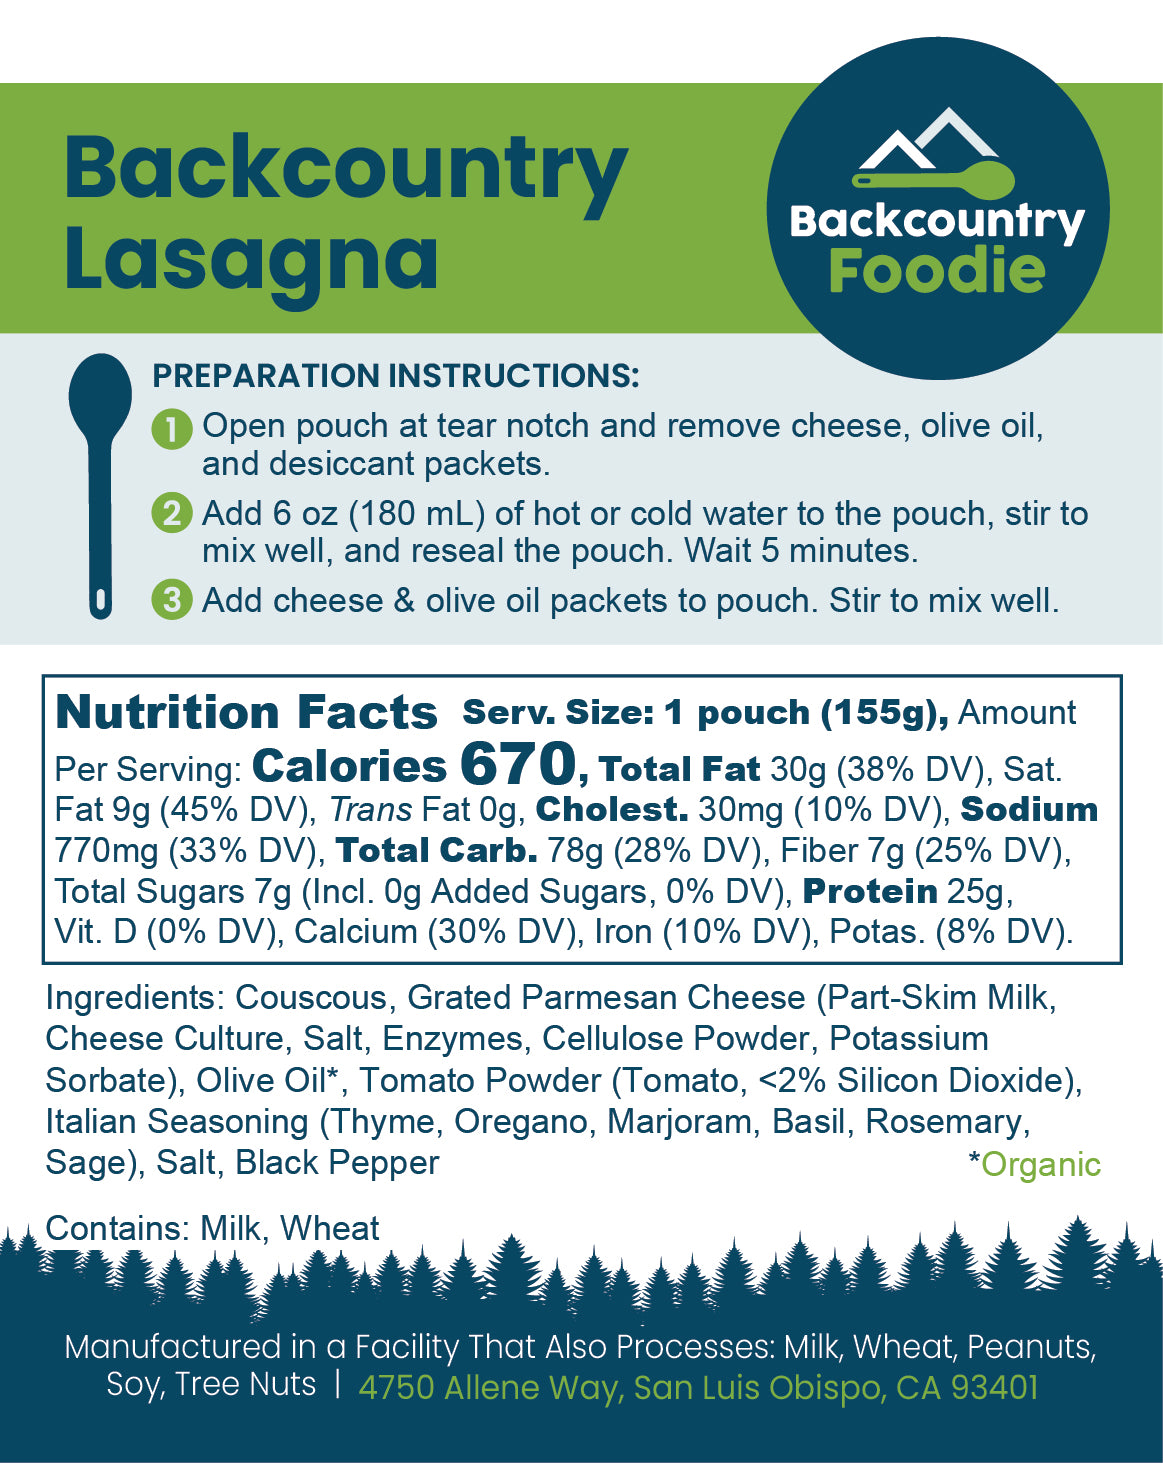 Backcountry Foodie - Backcountry Lasagna